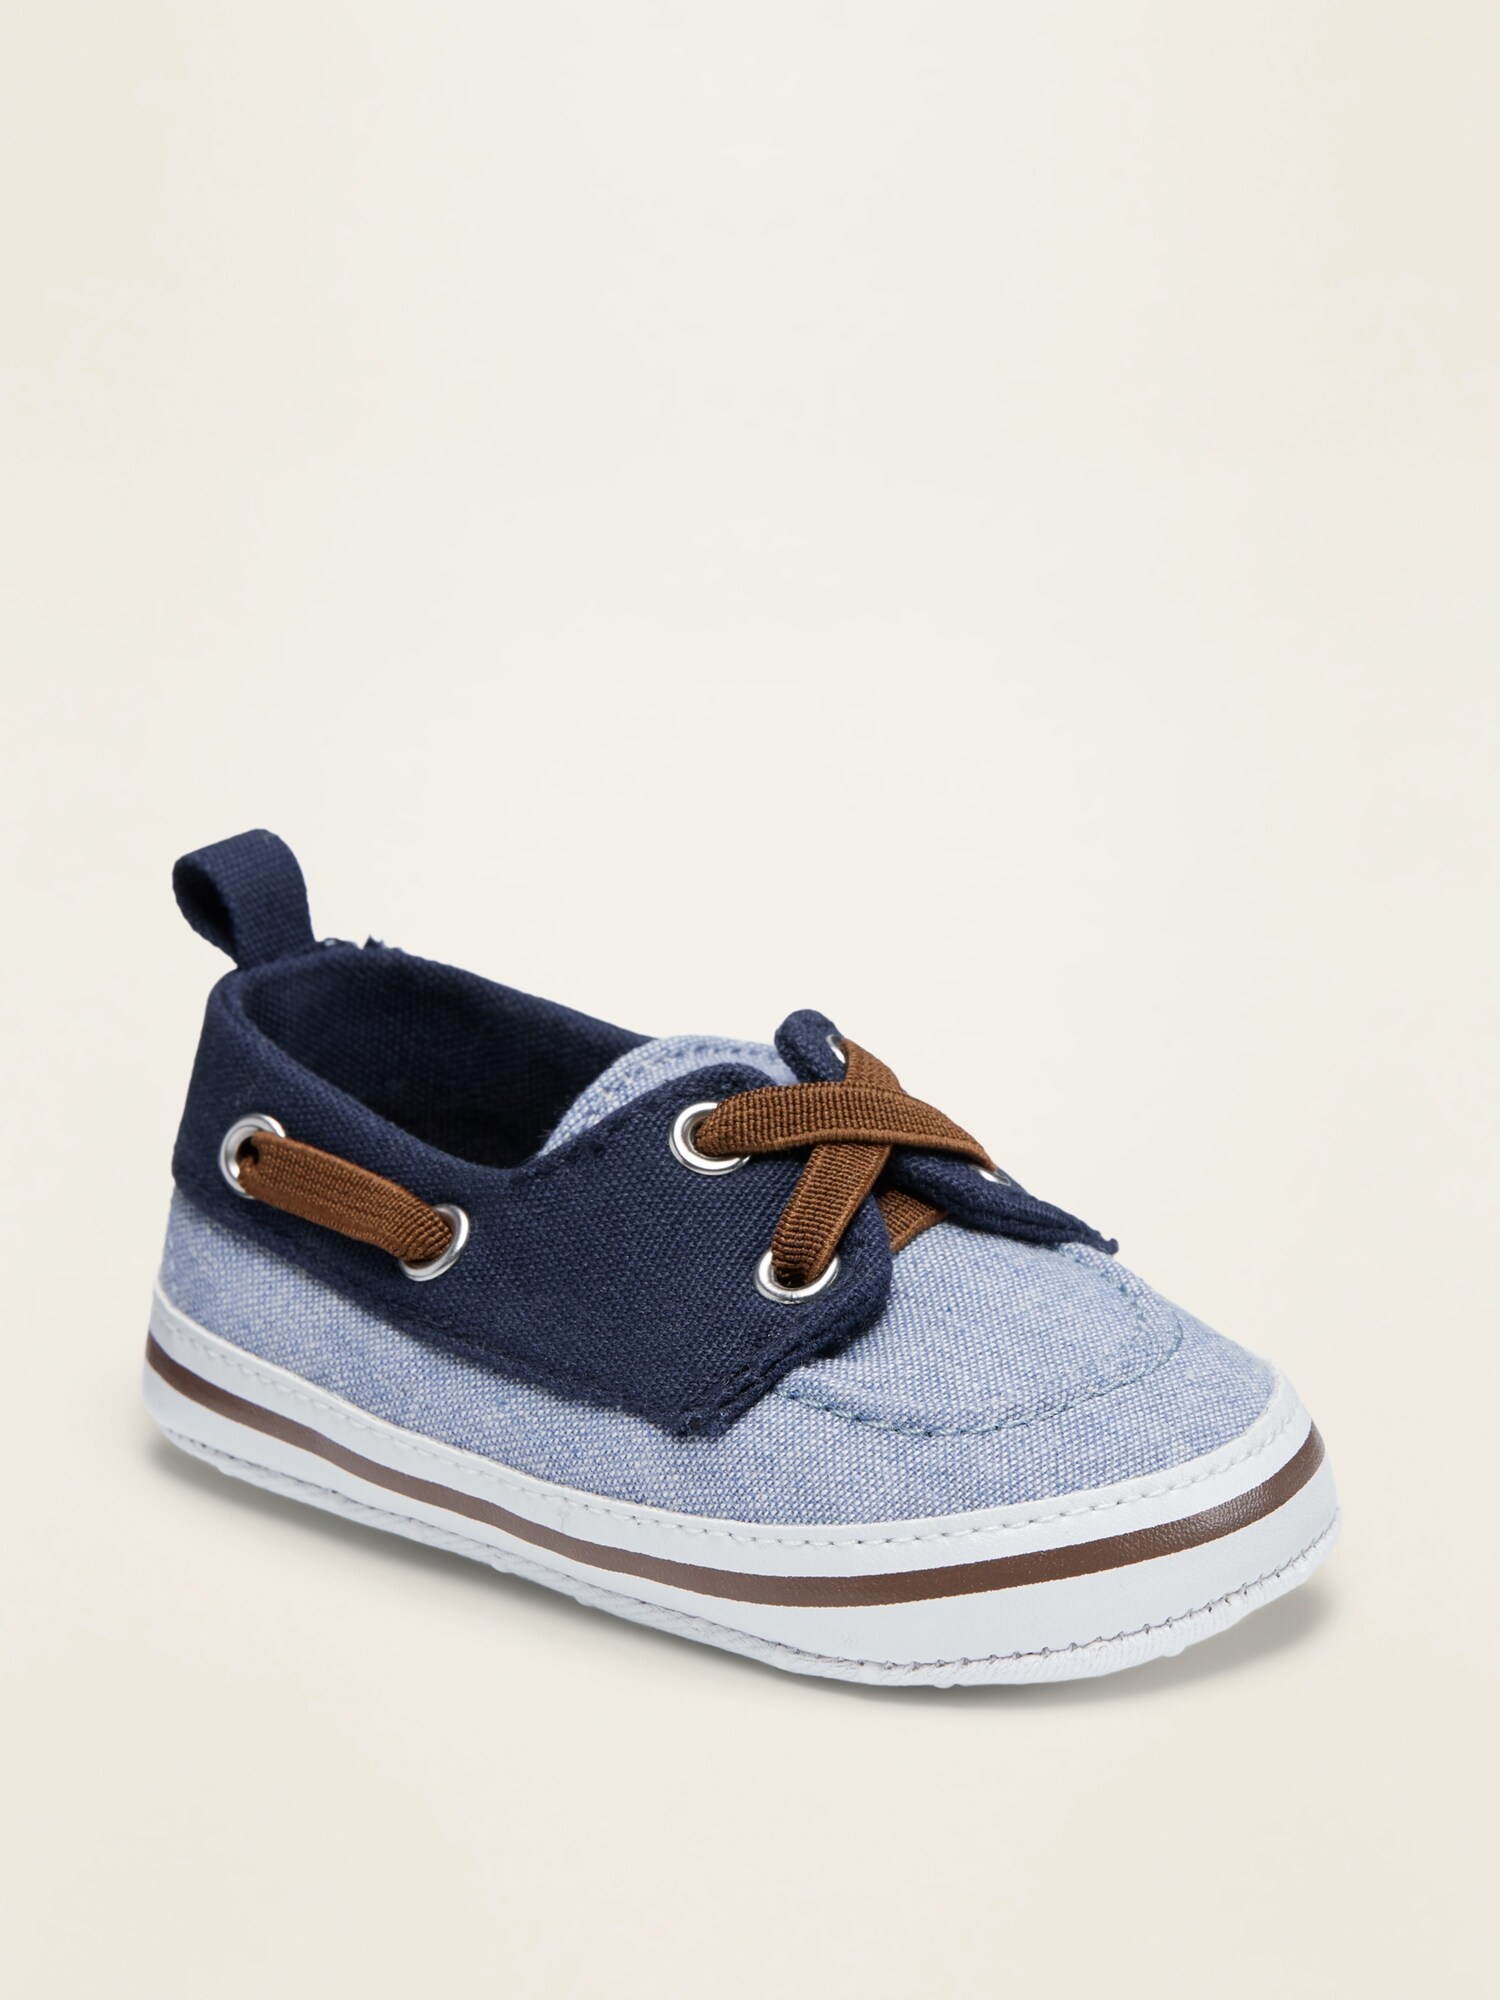 Chambray Boat Shoes for Toddler Boys